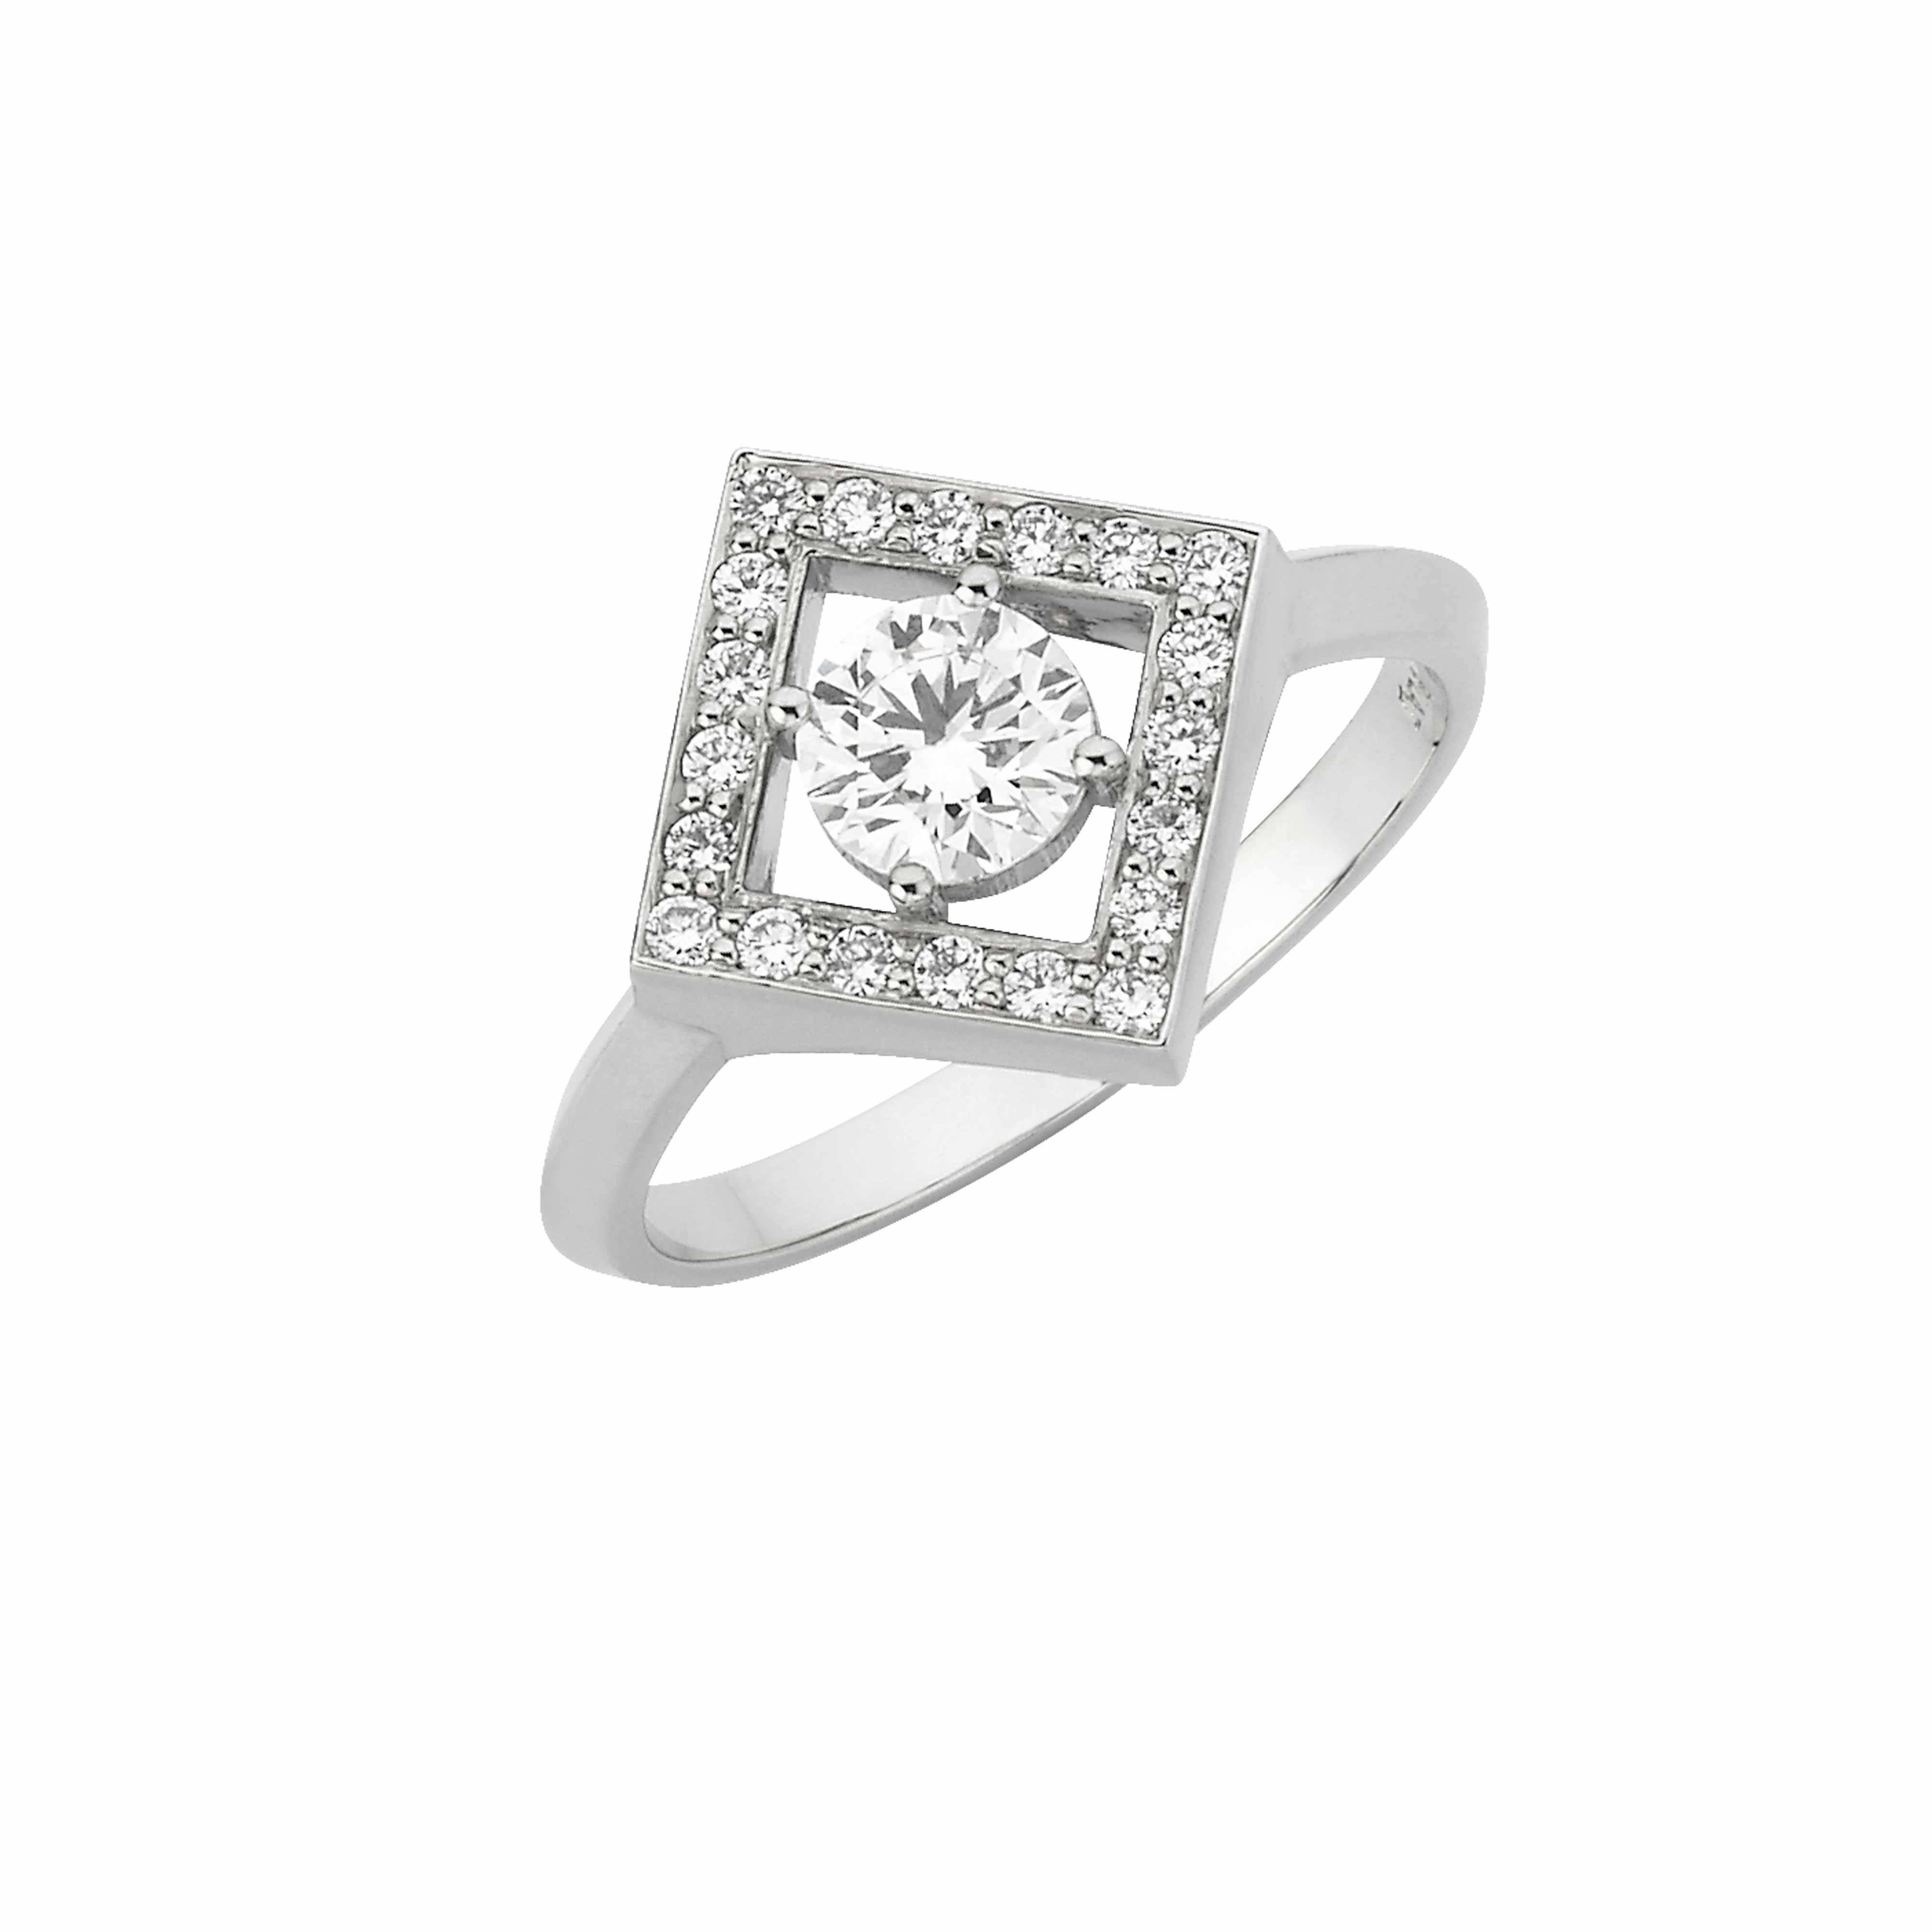 The Amavi Engagement Ring is set with a central diamond that is delicately framed by a square with 20 grain set round brilliant cut diamonds. This elegant form represents the ways in which we navigate through life, the points of the compass, the